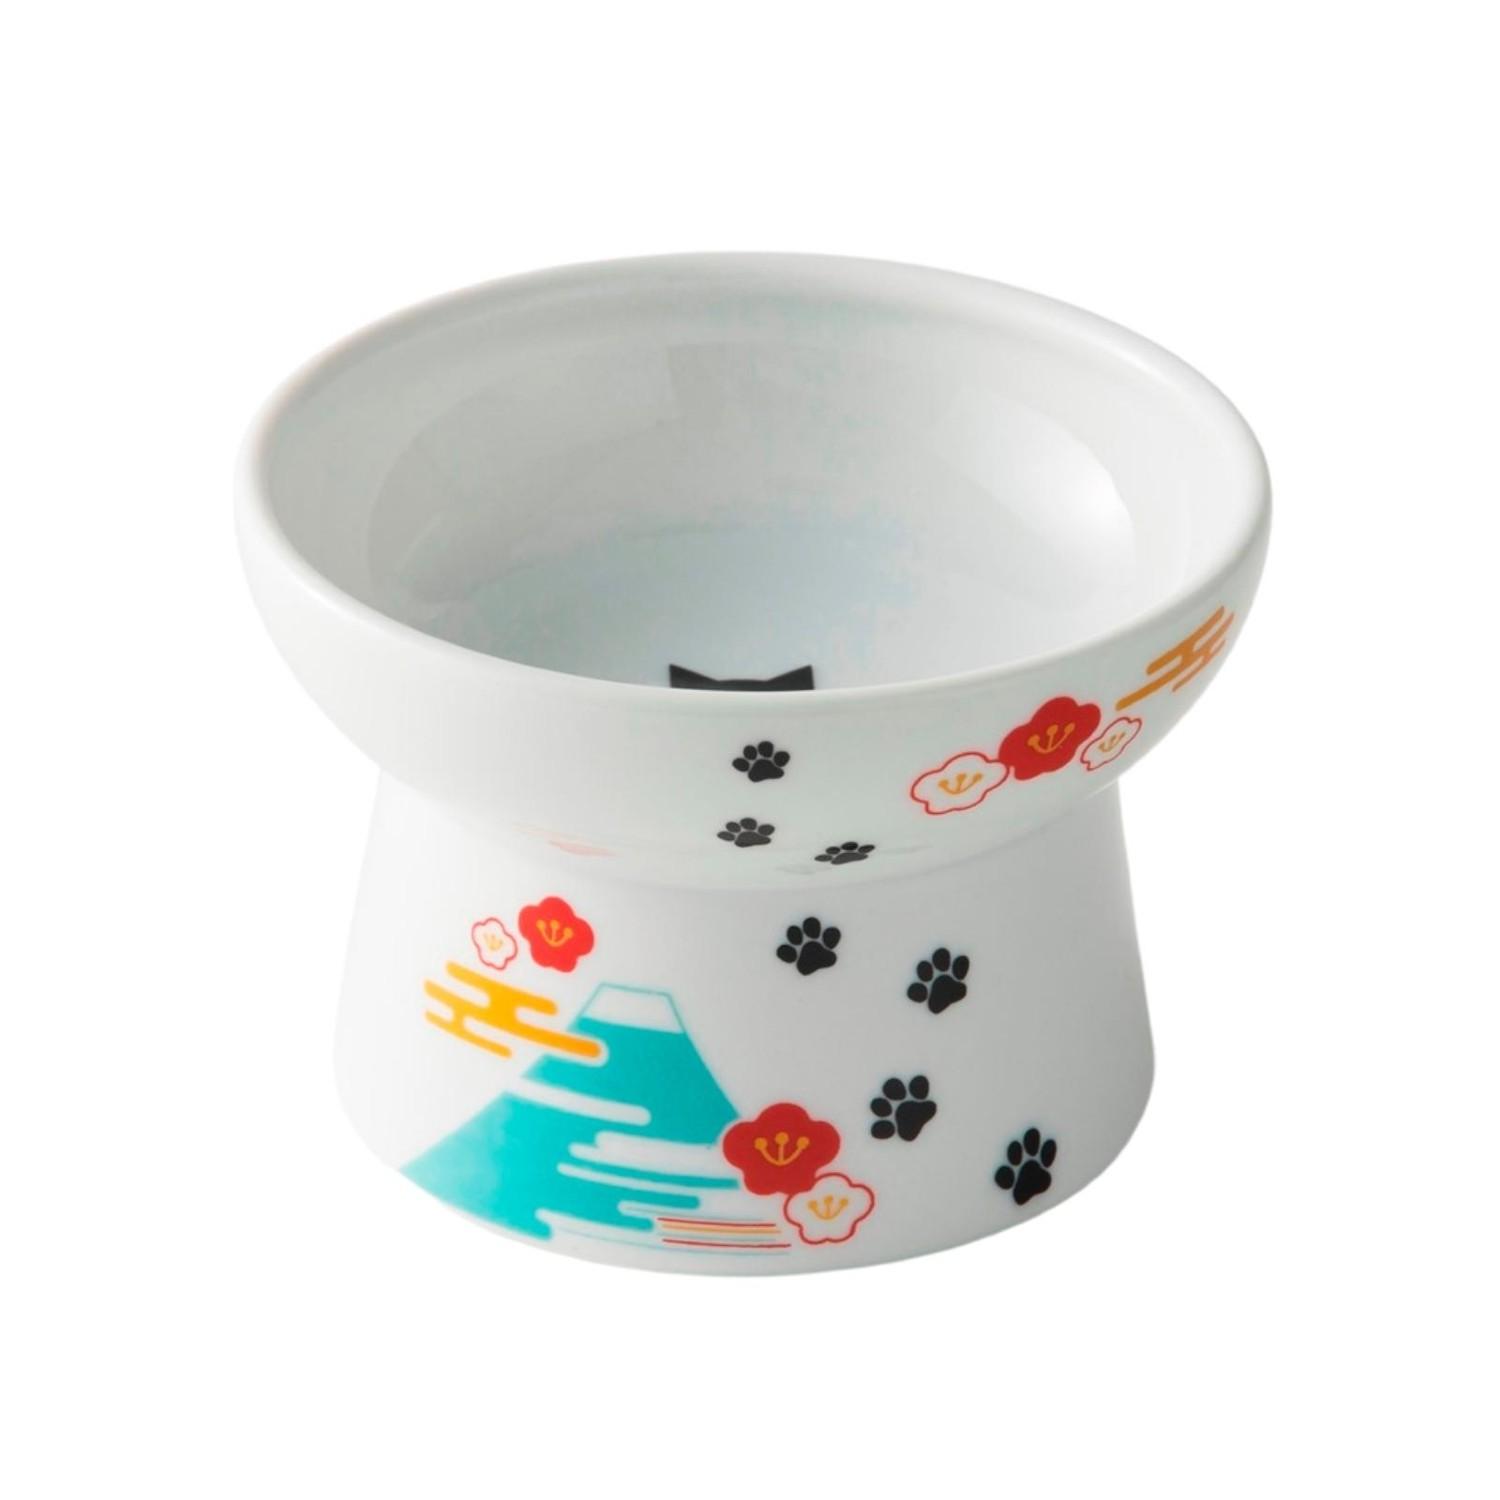 https://images.baxterboo.com/global/images/products/large/necoichi-raised-cat-food-bowl-fuji-limited-edition-8445.jpg